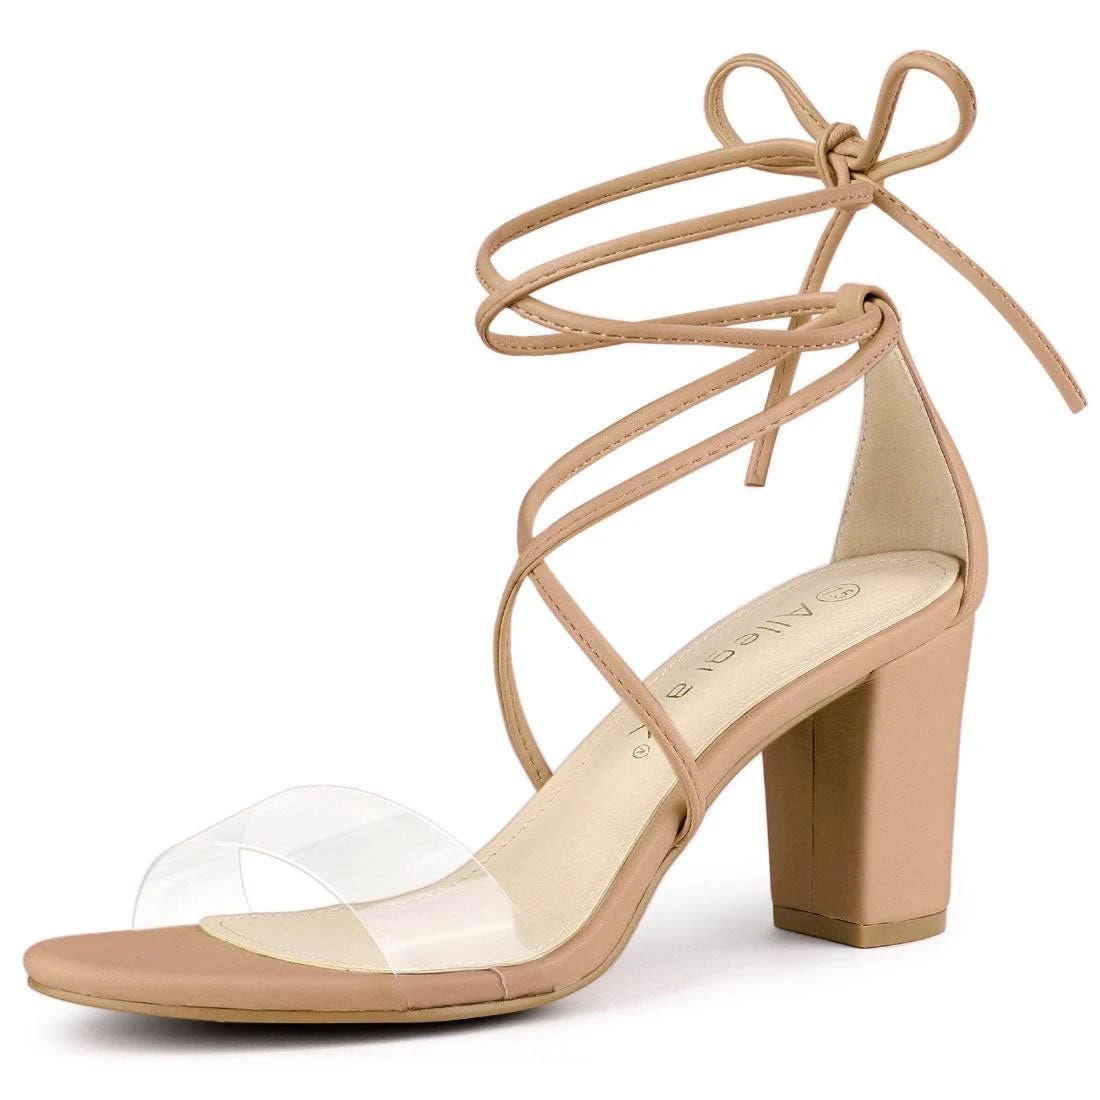 Lace-Up Clear Strap Block Heels with Comfortable Insole | Image